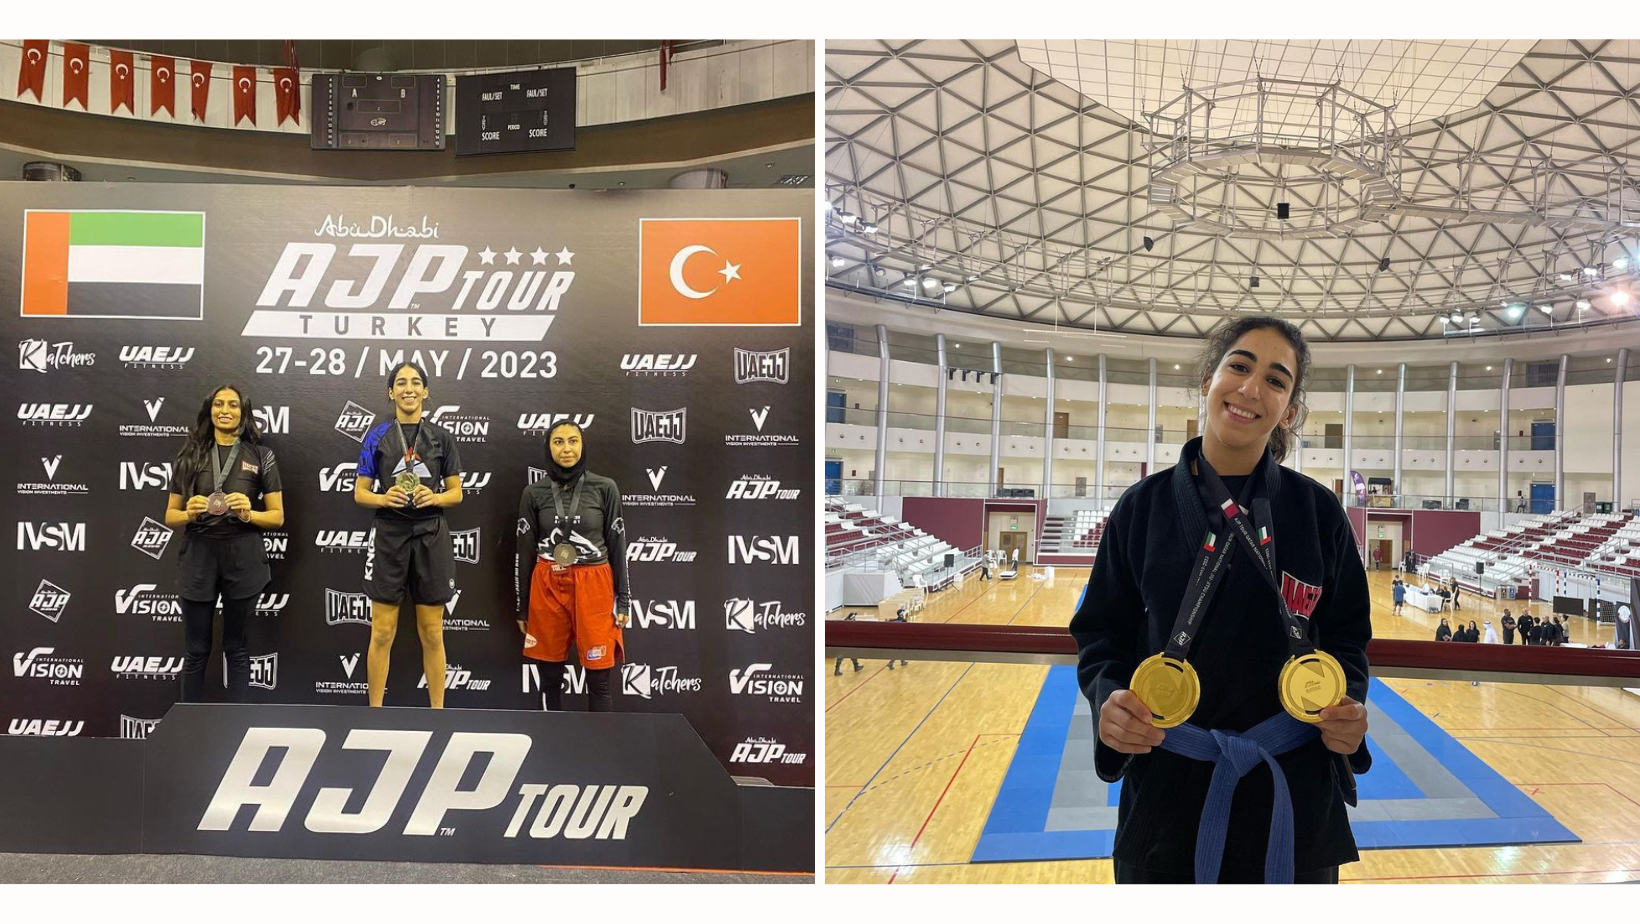 Alaa Salah, Jiu-Jitsu athlete, international competitions, gold medals, passion for the sport, pursuing dreams, full-time career, inspiring young girls, role model, Bahraini athlete, bahrain athelets, localbh, local bahrain